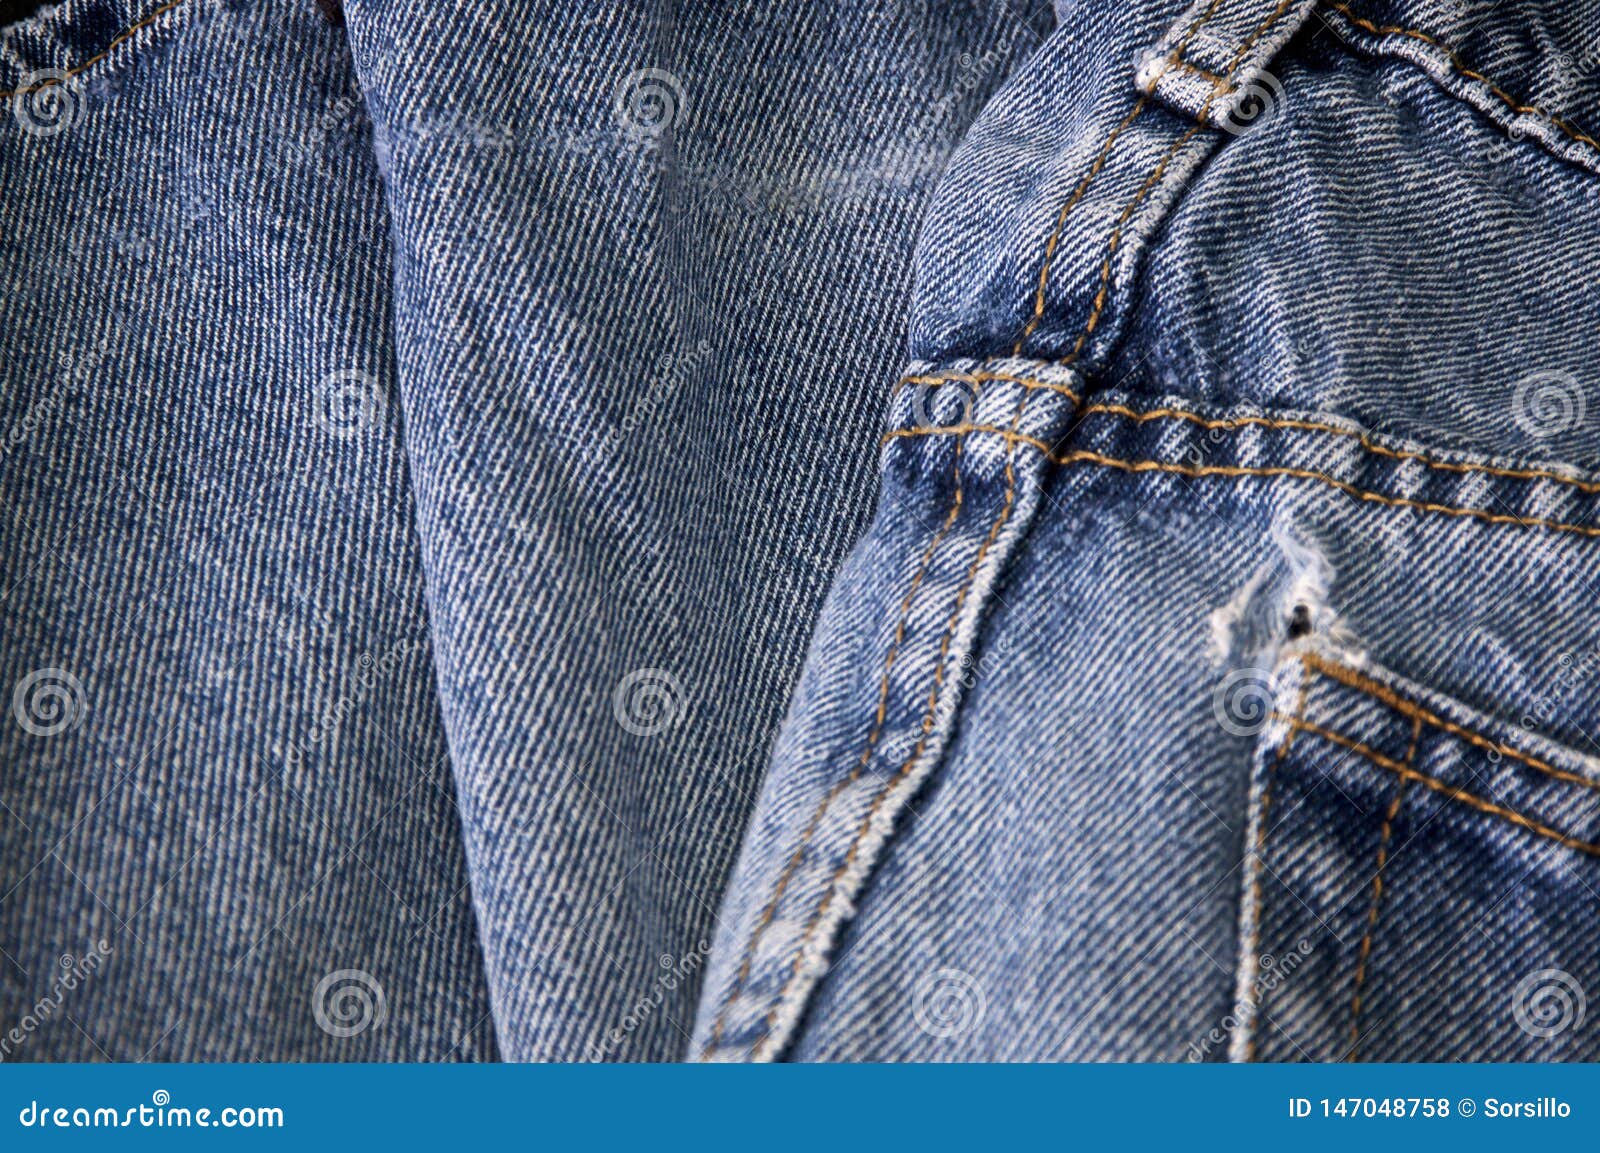 Worn faded jeans with hole stock photo. Image of close - 147048758